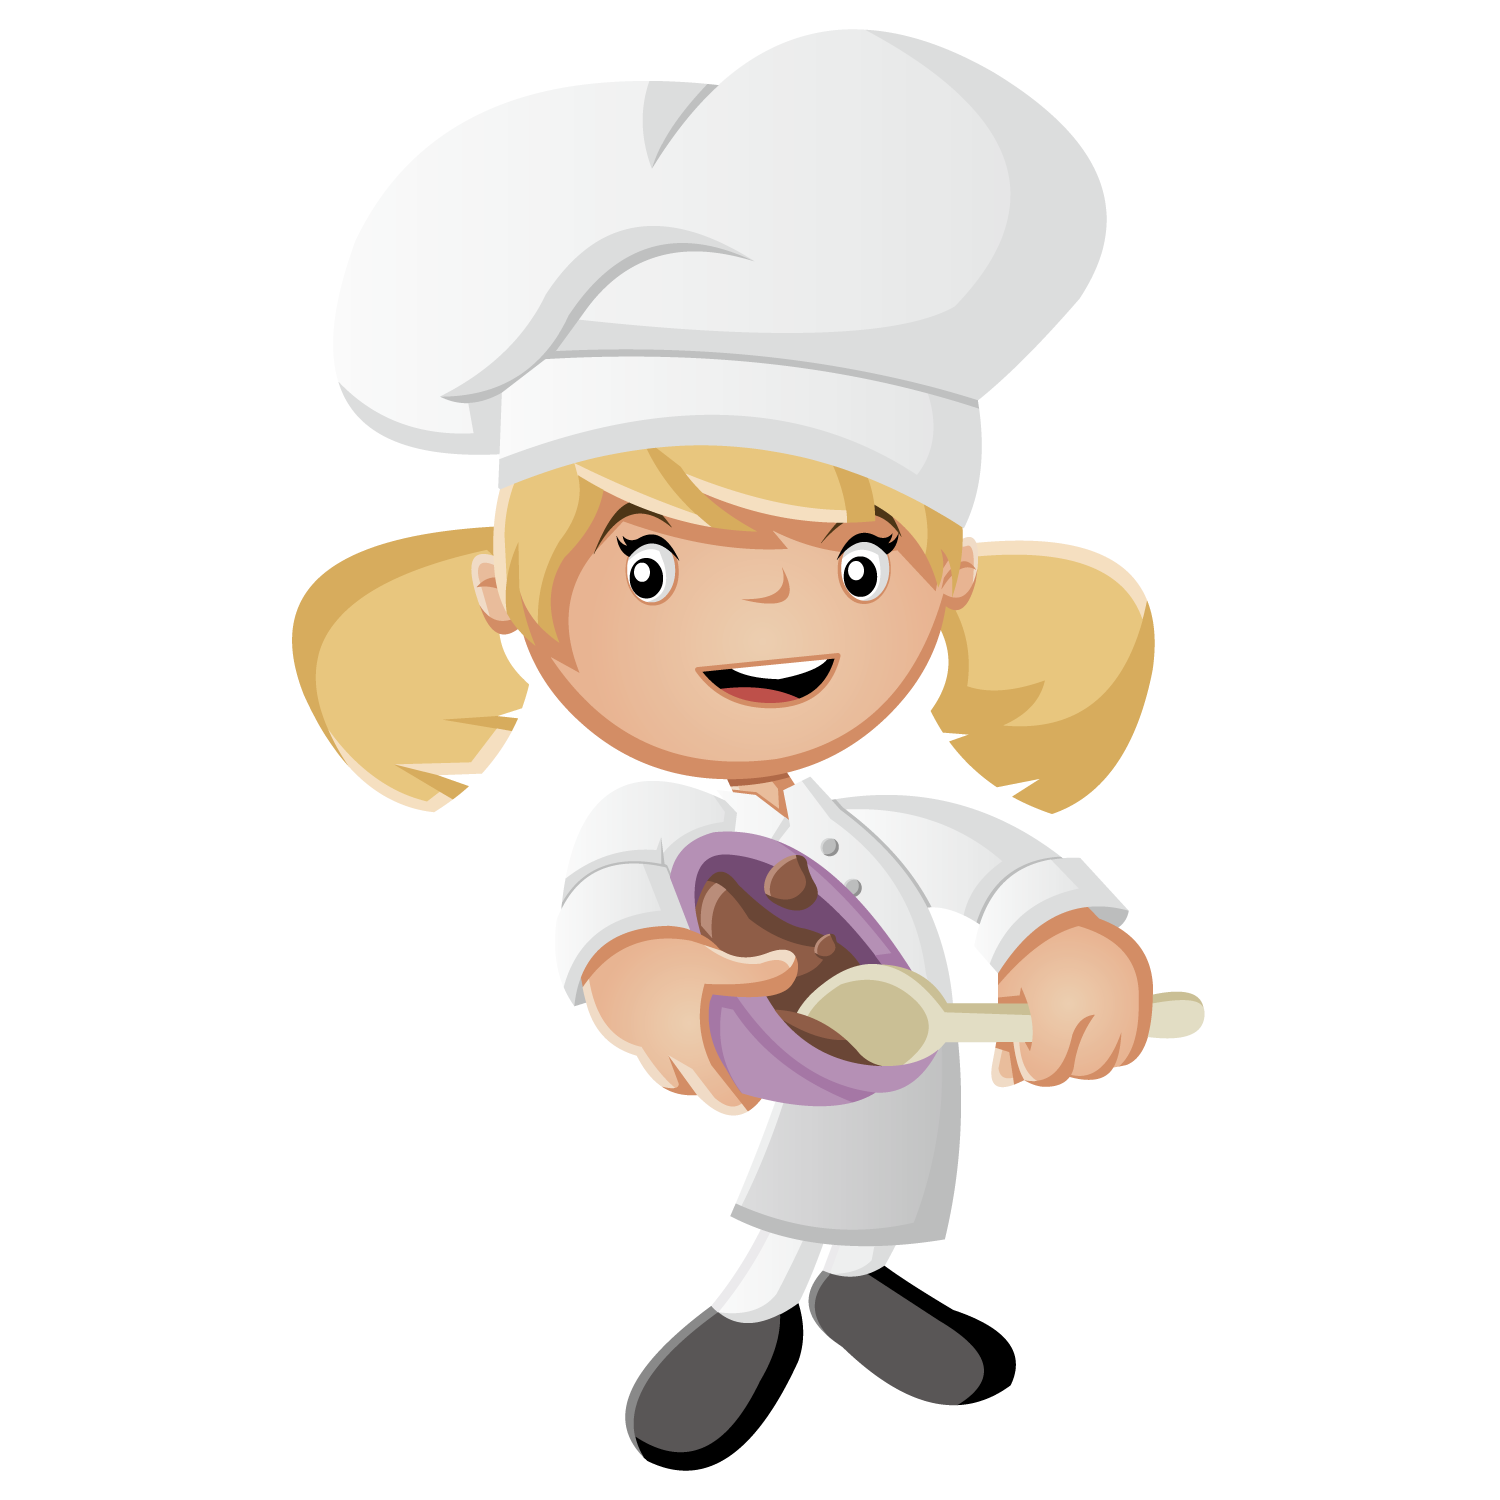 Cooking Animated Pictures - Cooking Gif Clip Pinclipart | Bodewasude